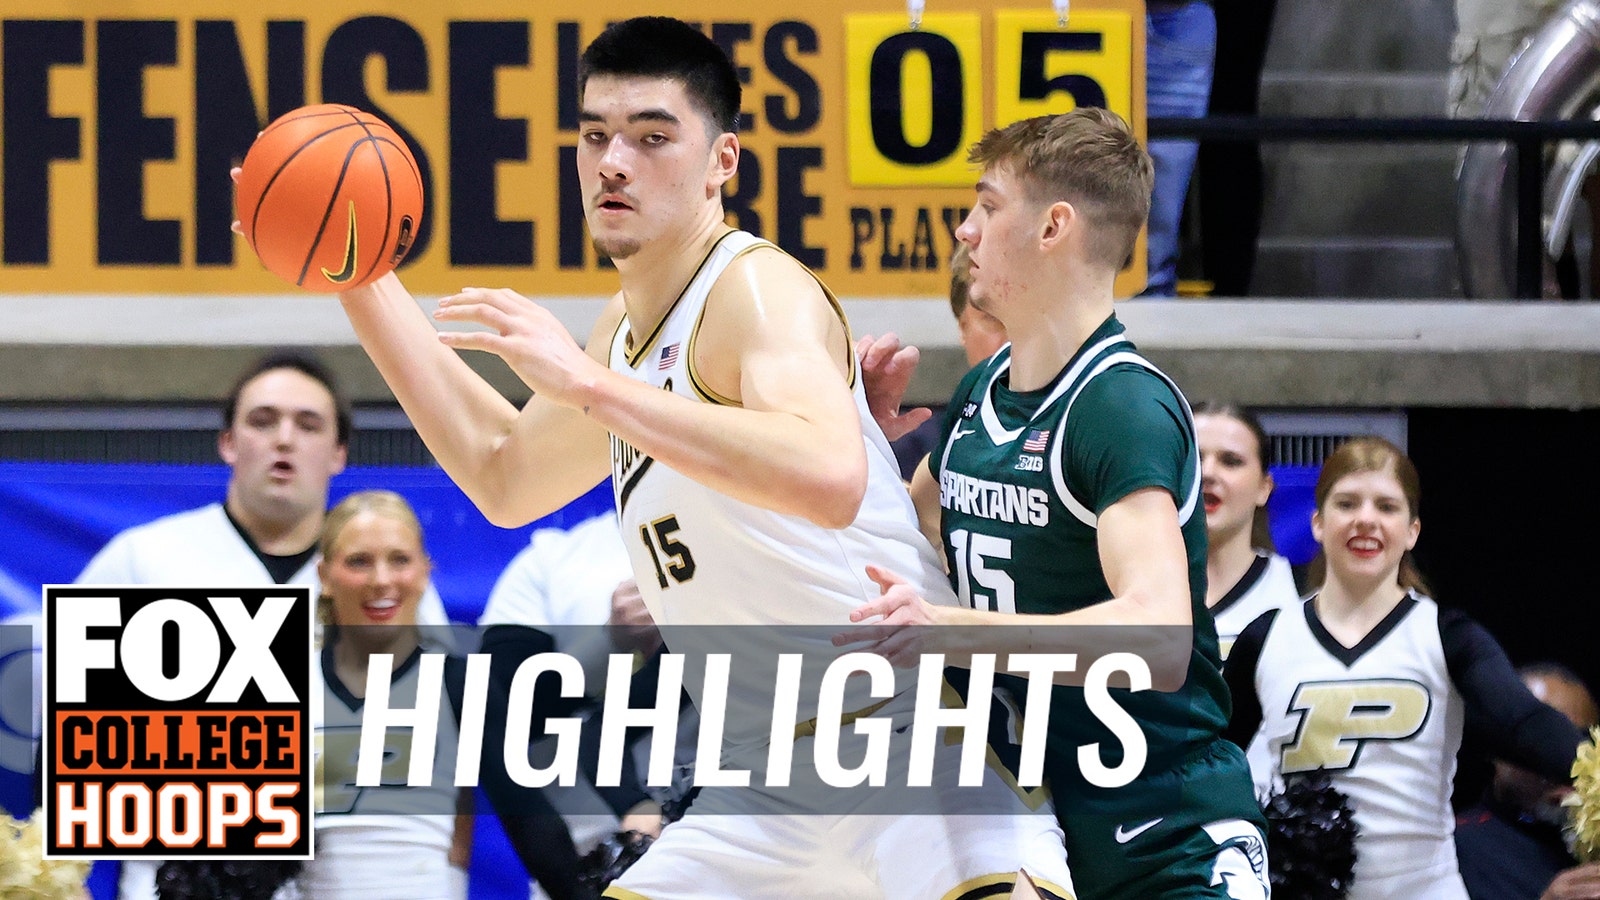 Michigan State Spartans vs. No. 2 Purdue Boilermakers Highlights